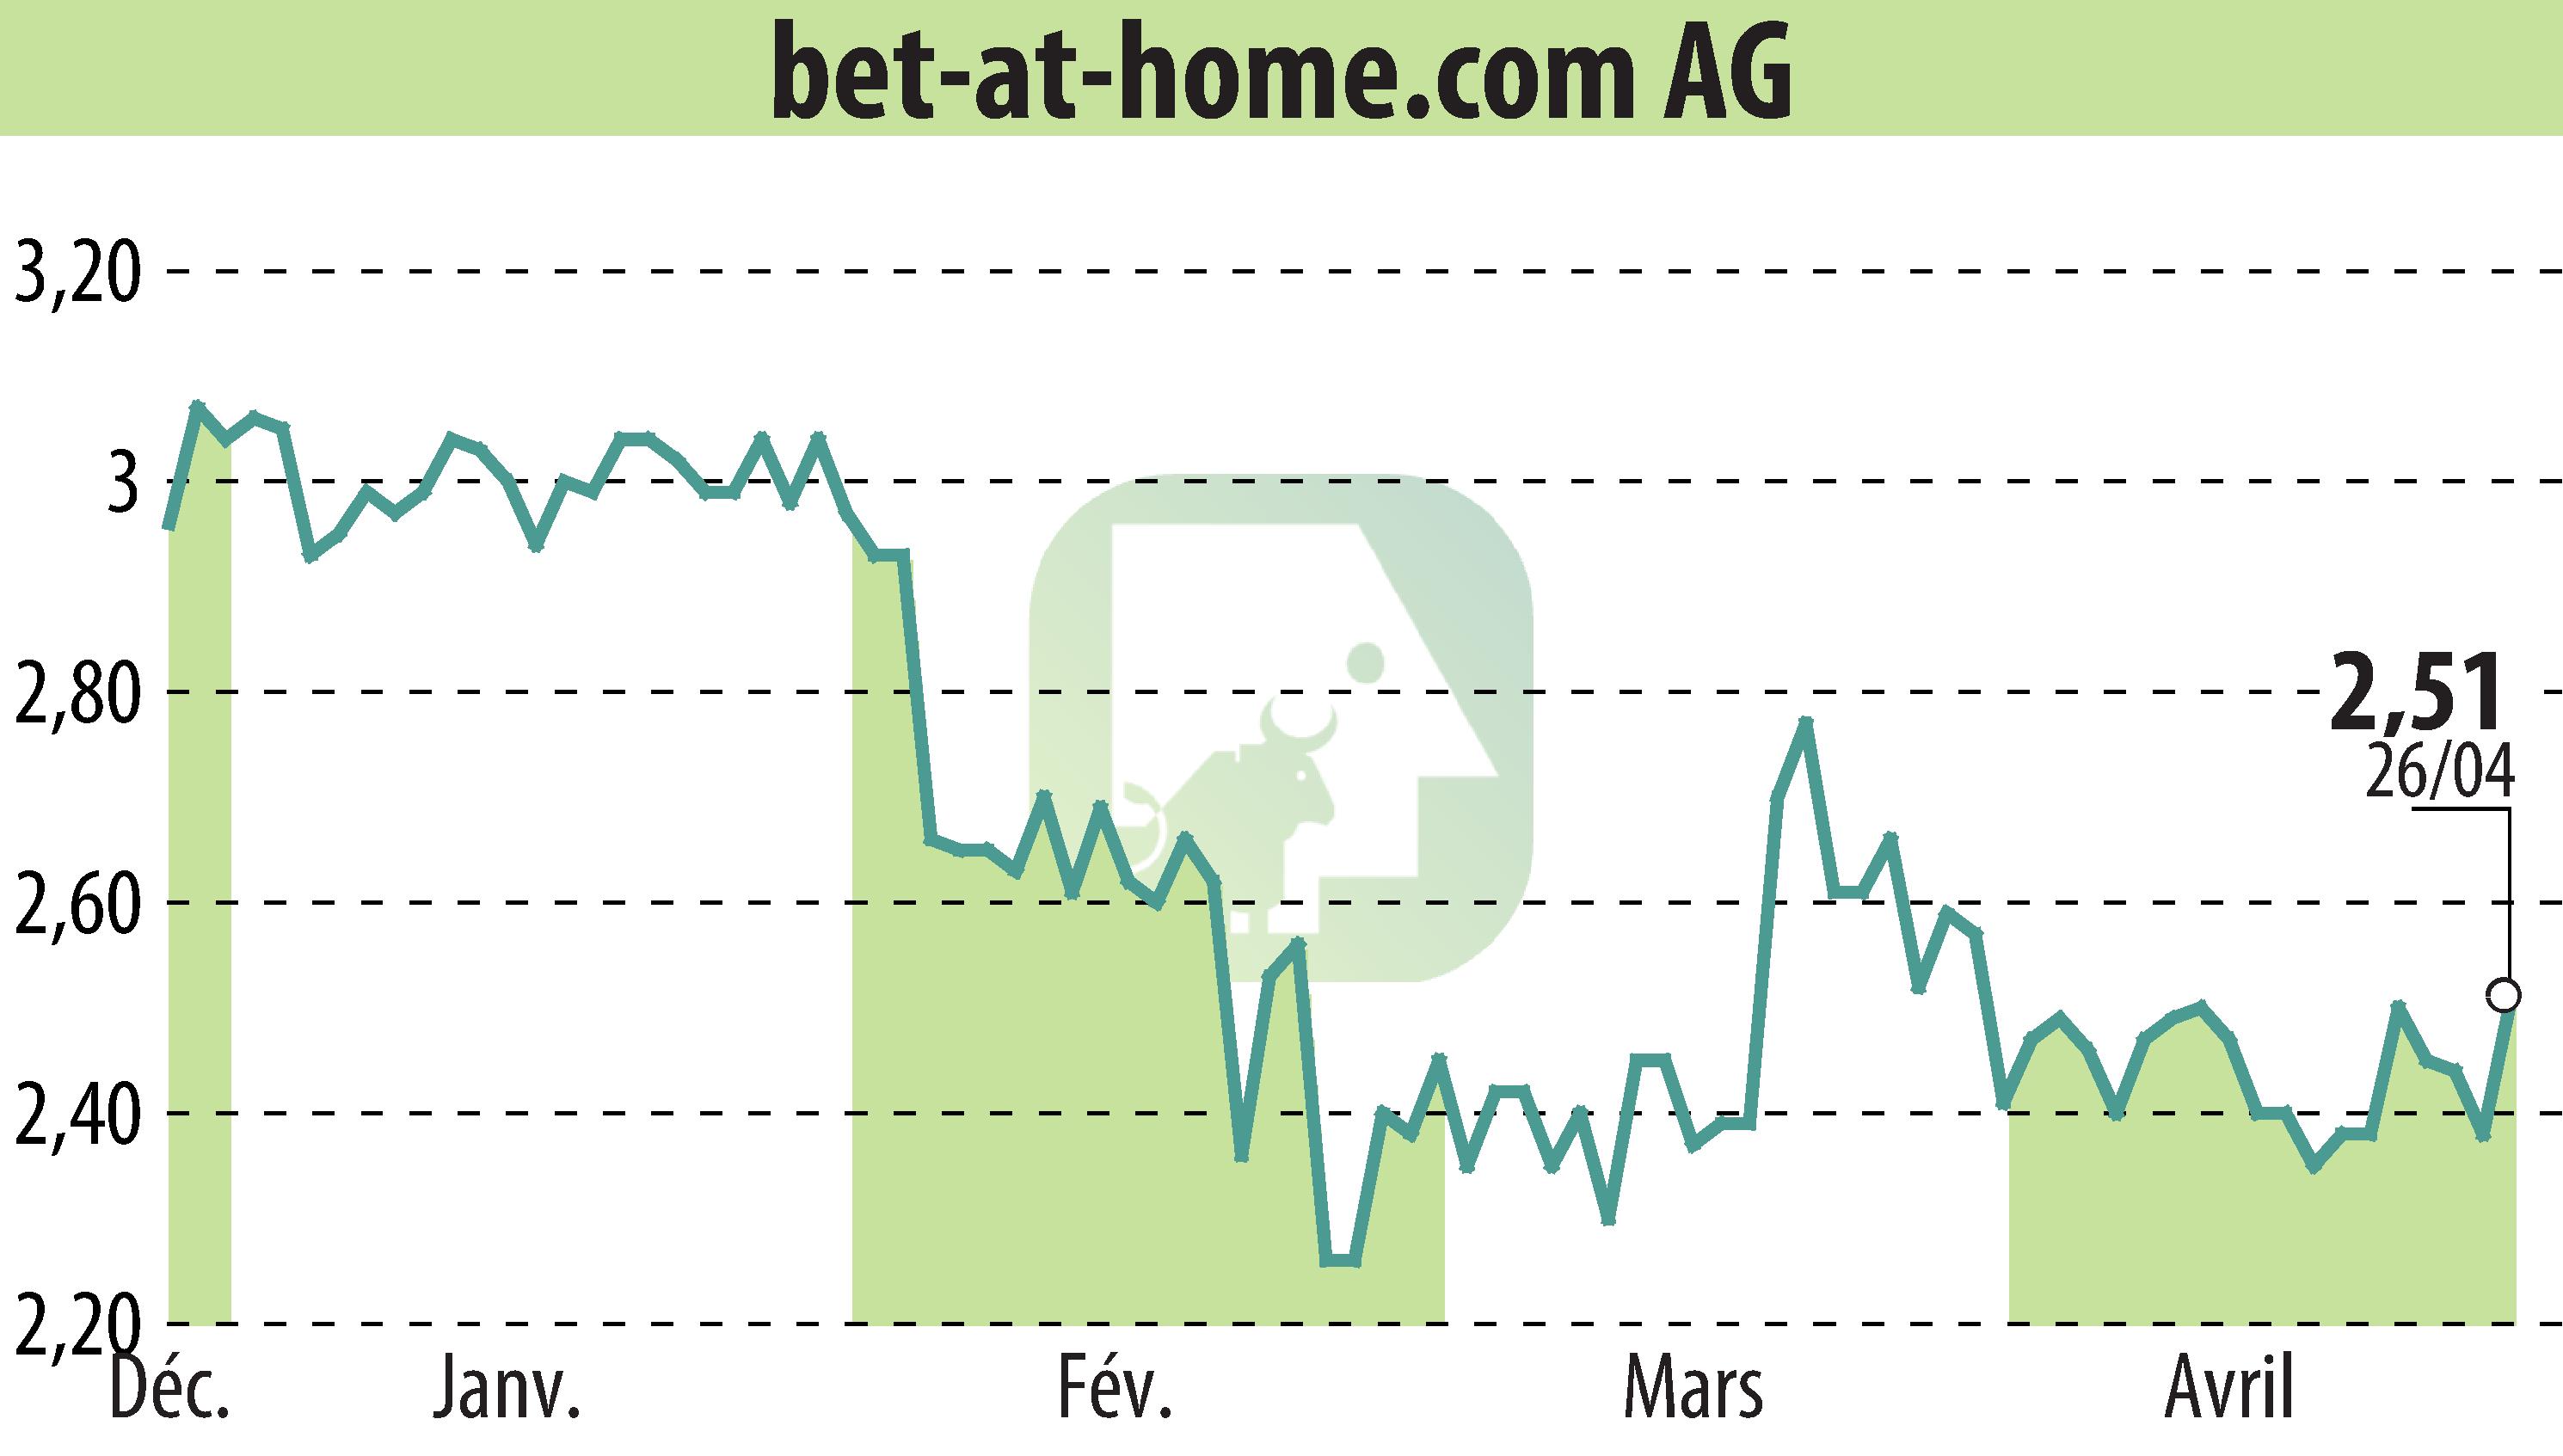 Stock price chart of Bet-at-home.com AG (EBR:ACX) showing fluctuations.